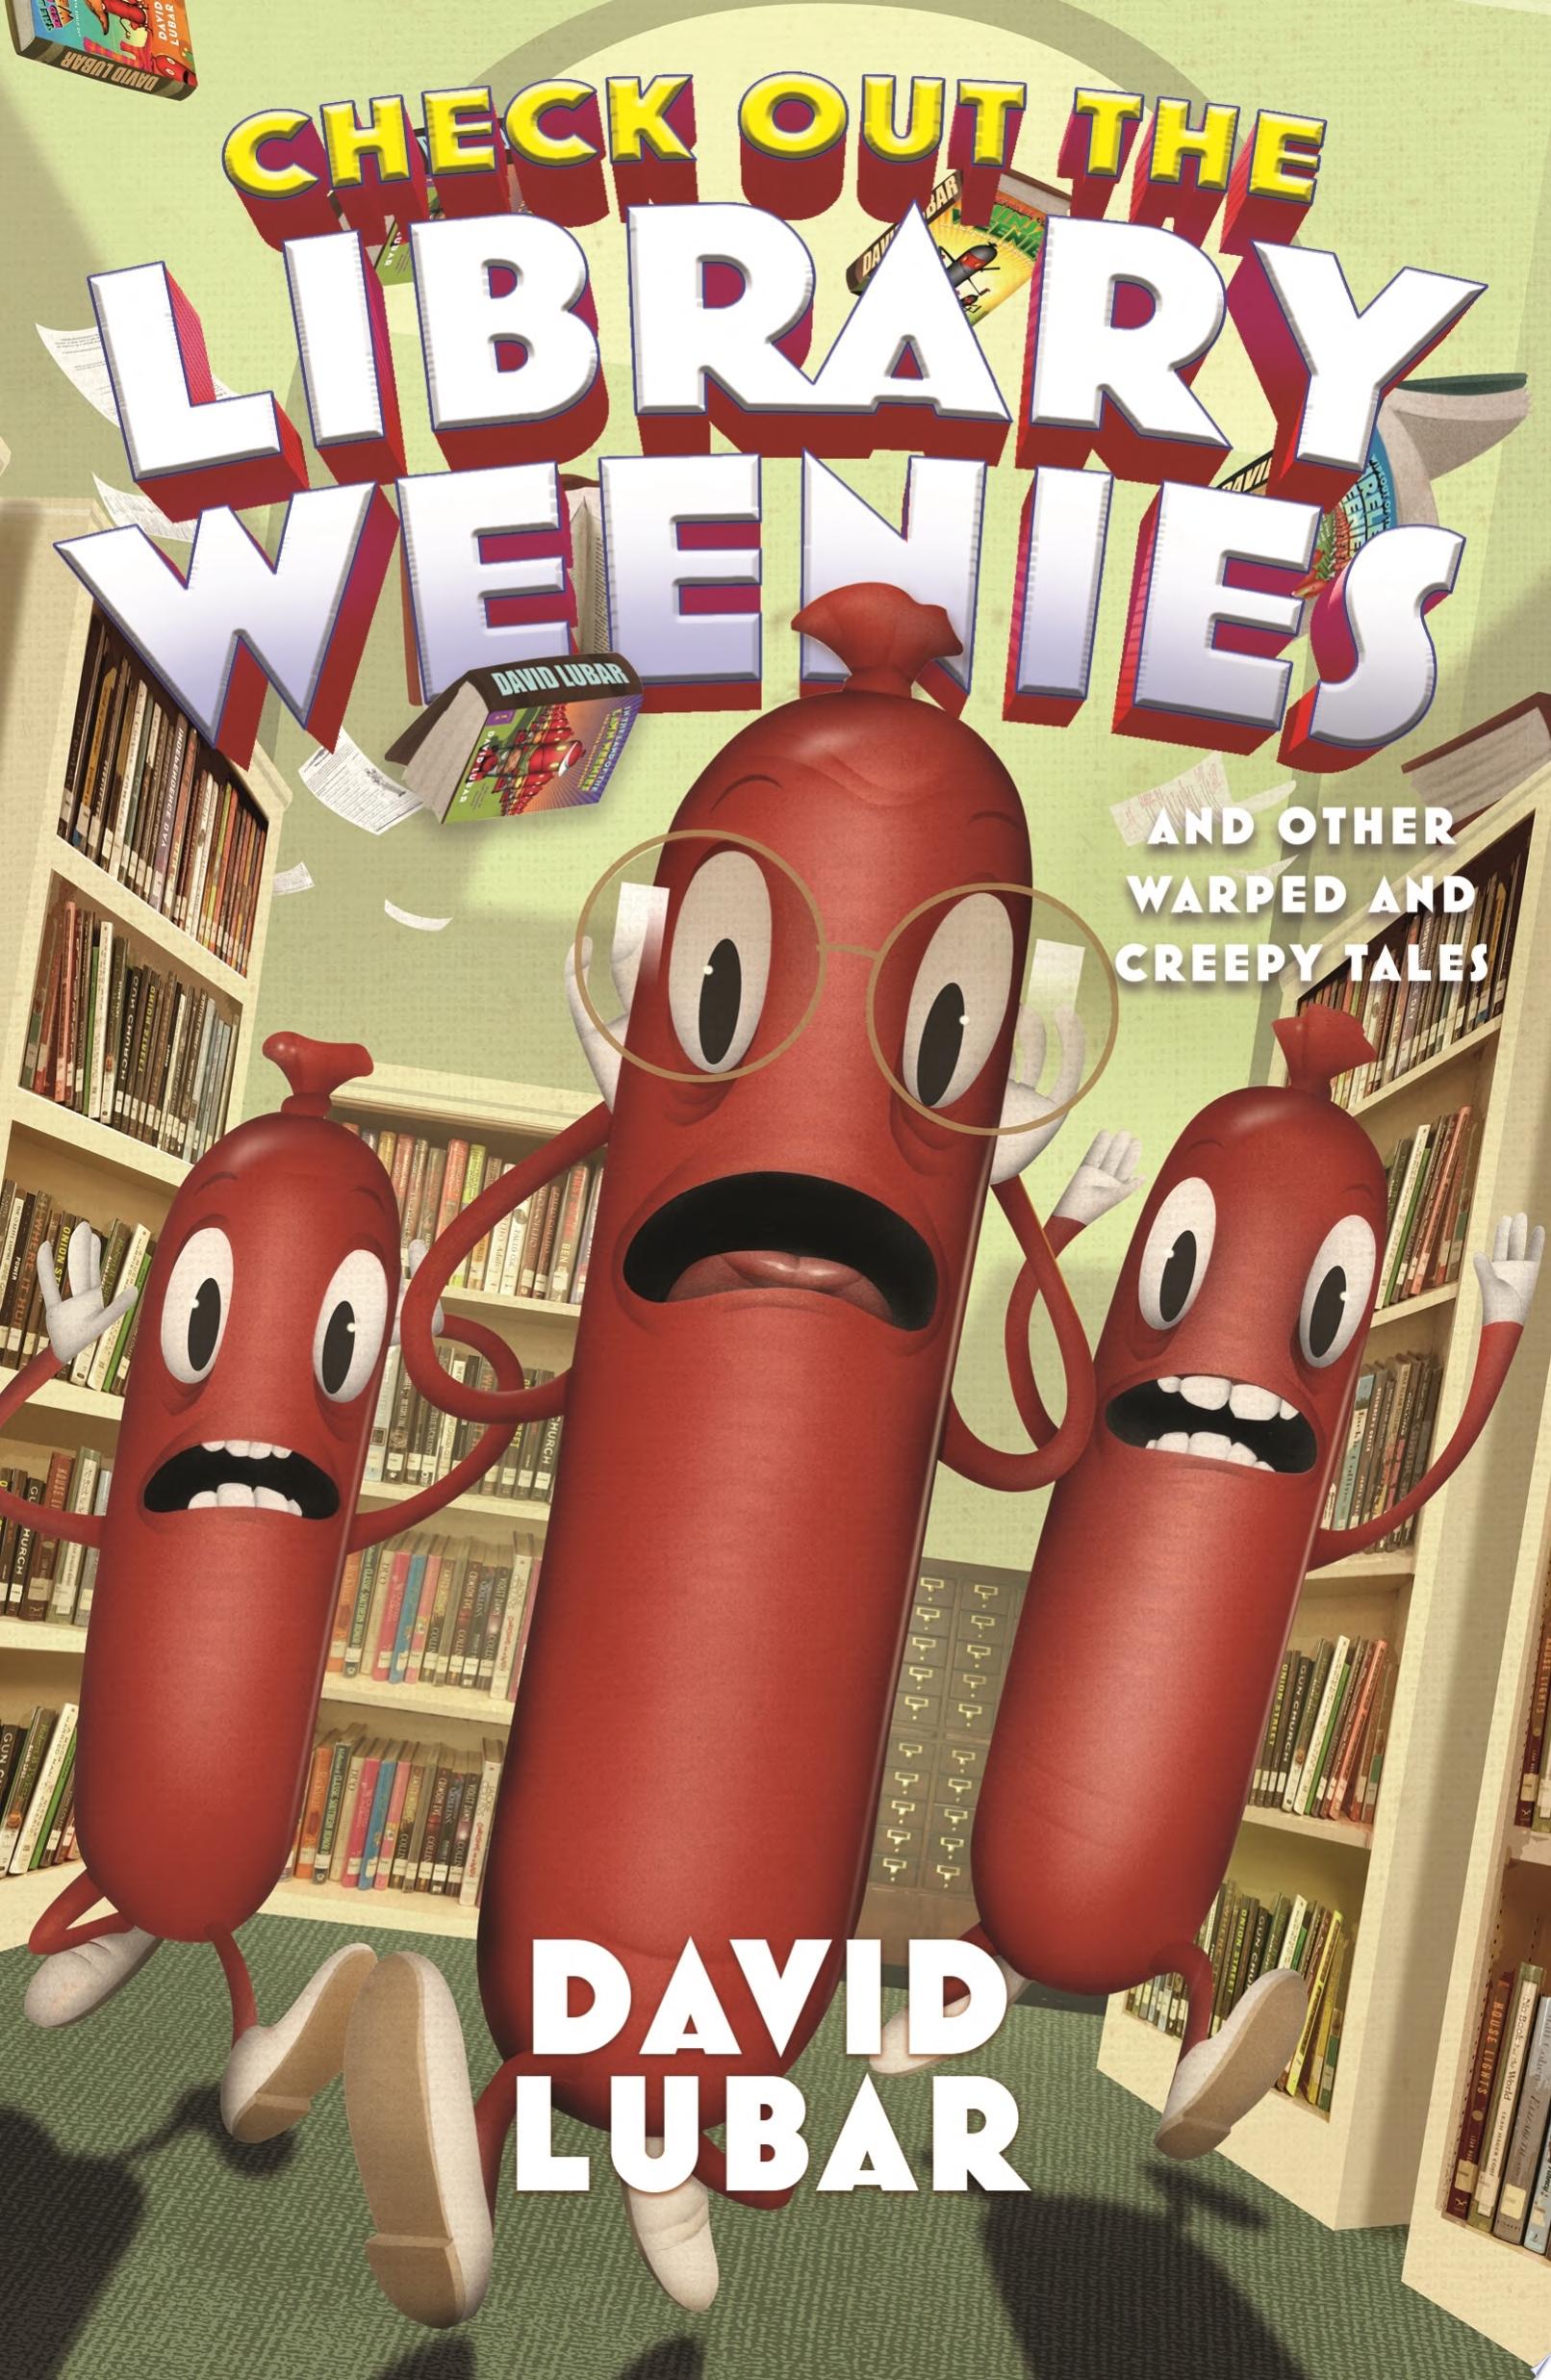 Image for "Check Out the Library Weenies"